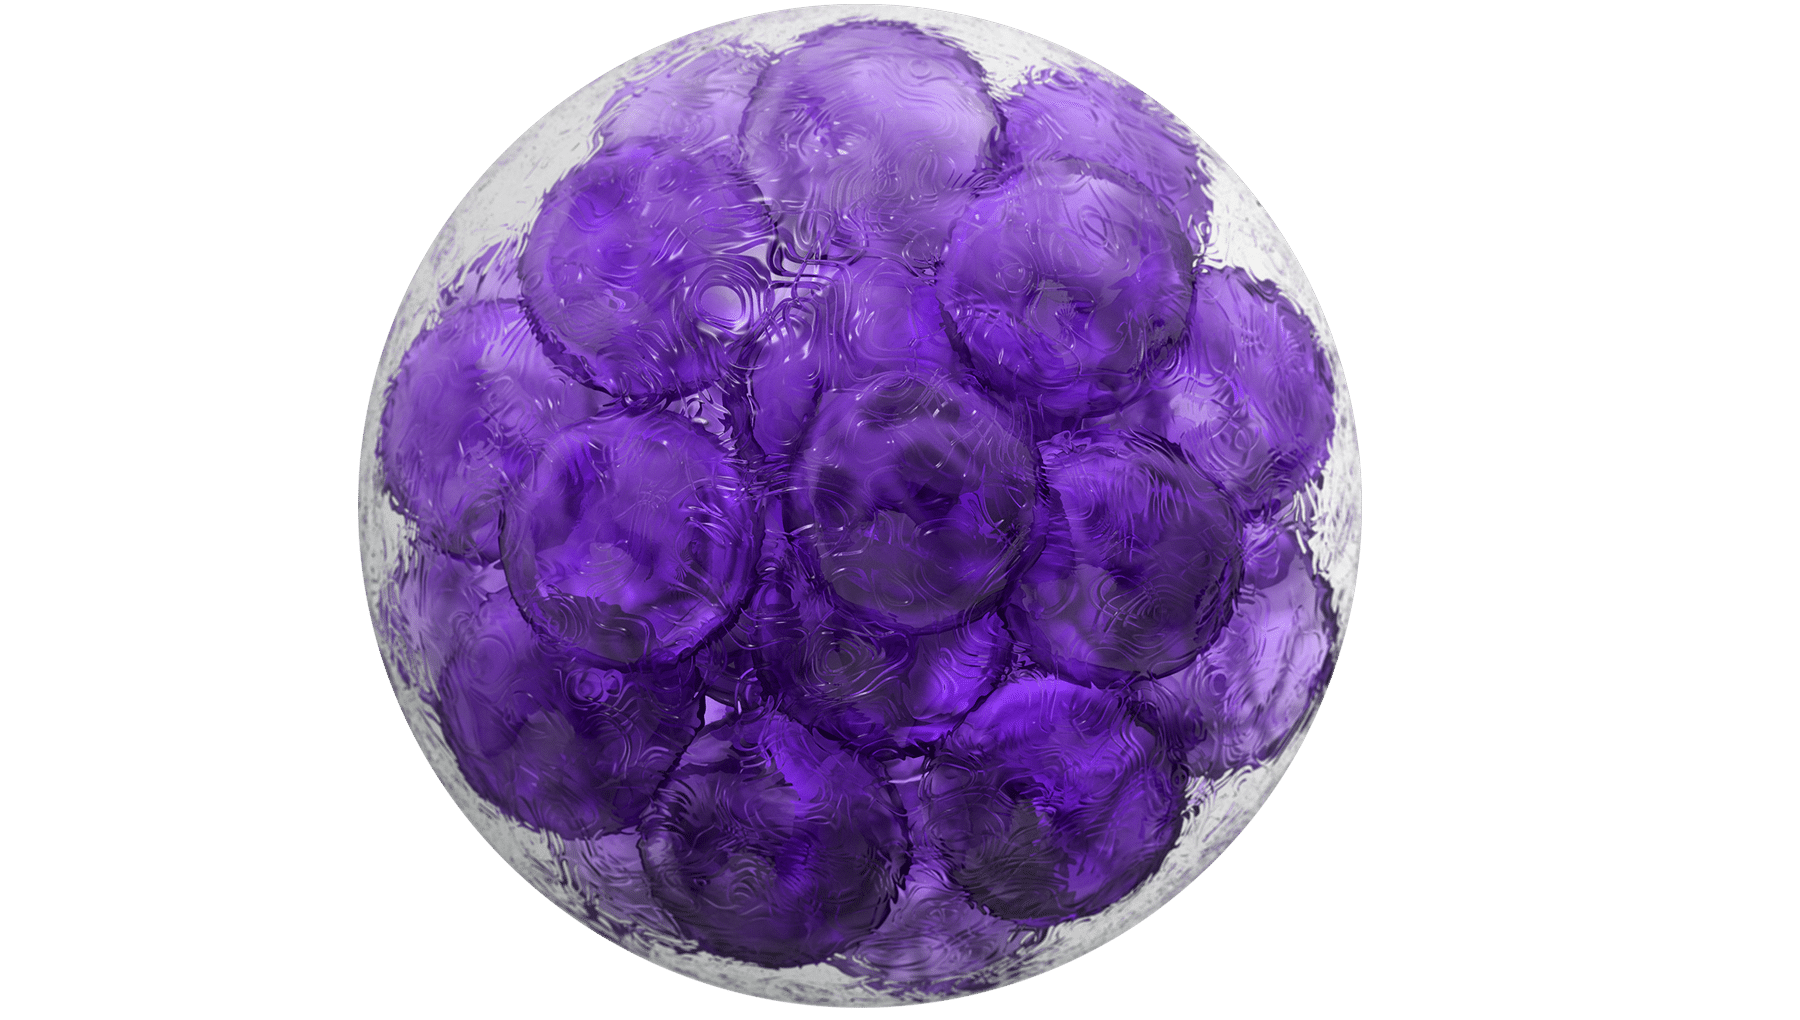 Roundel image of purple cluster of cells dividing